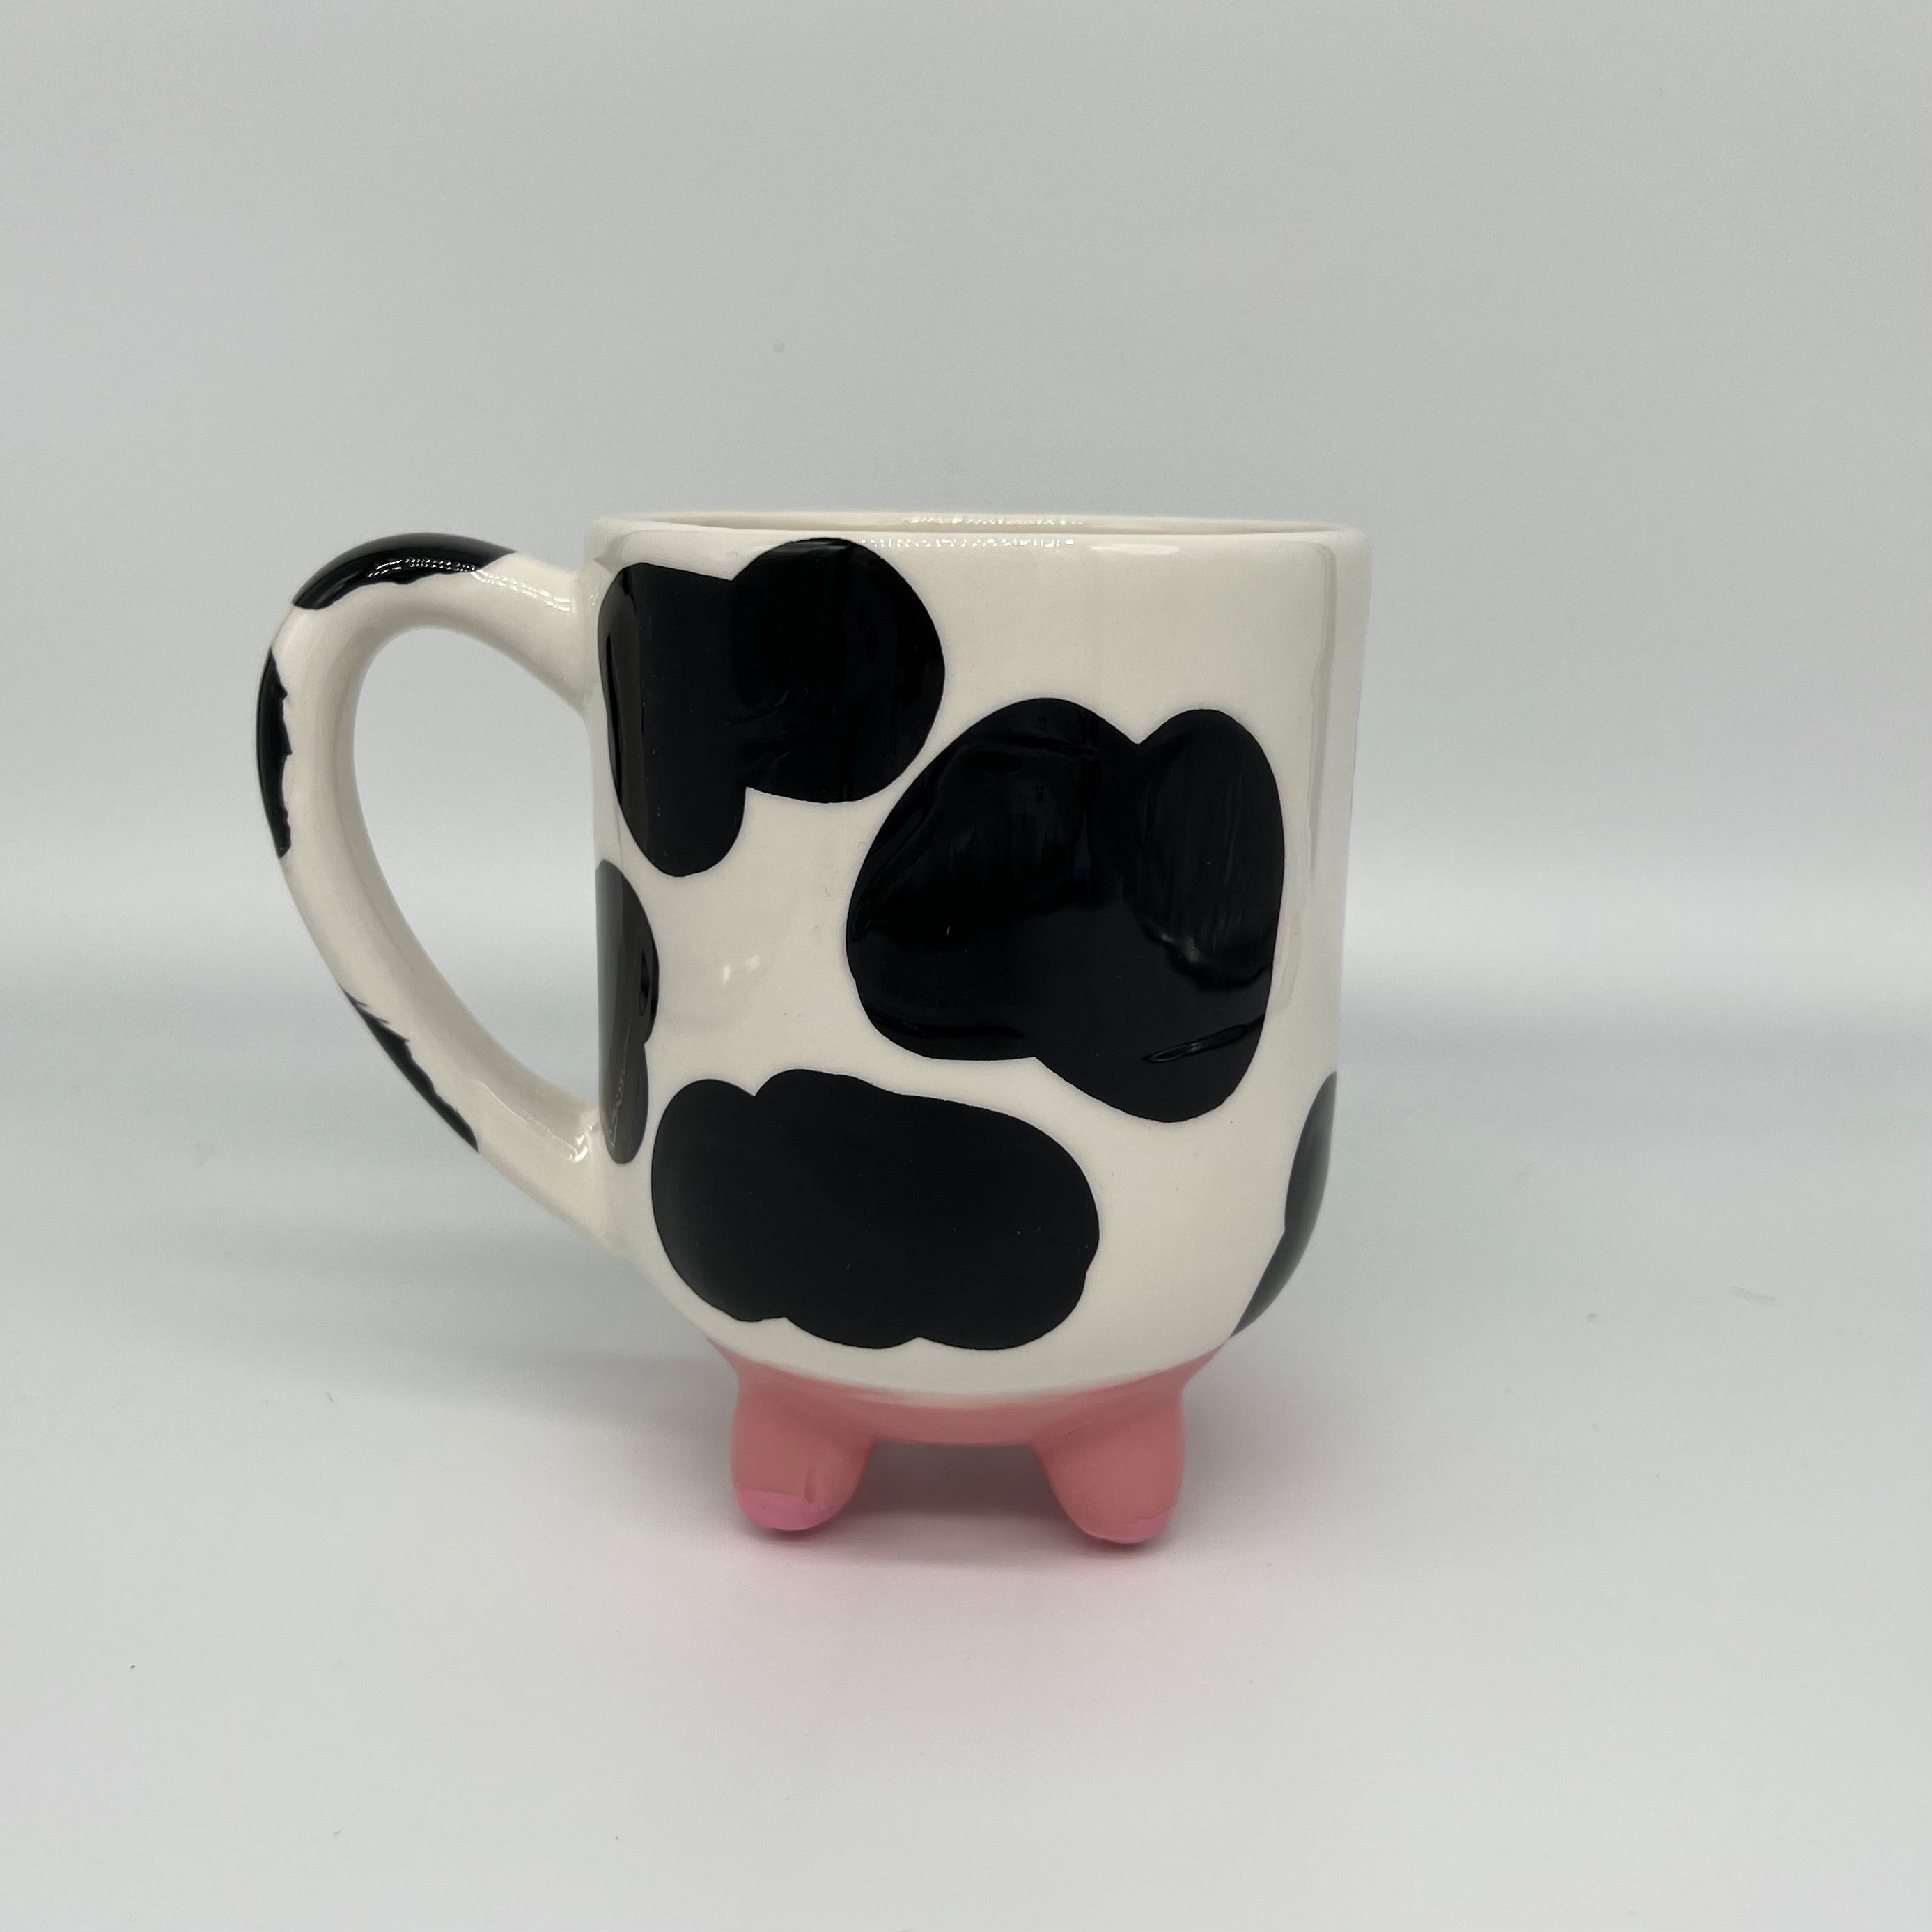 Mooing Cow Cups : talking moo mixer